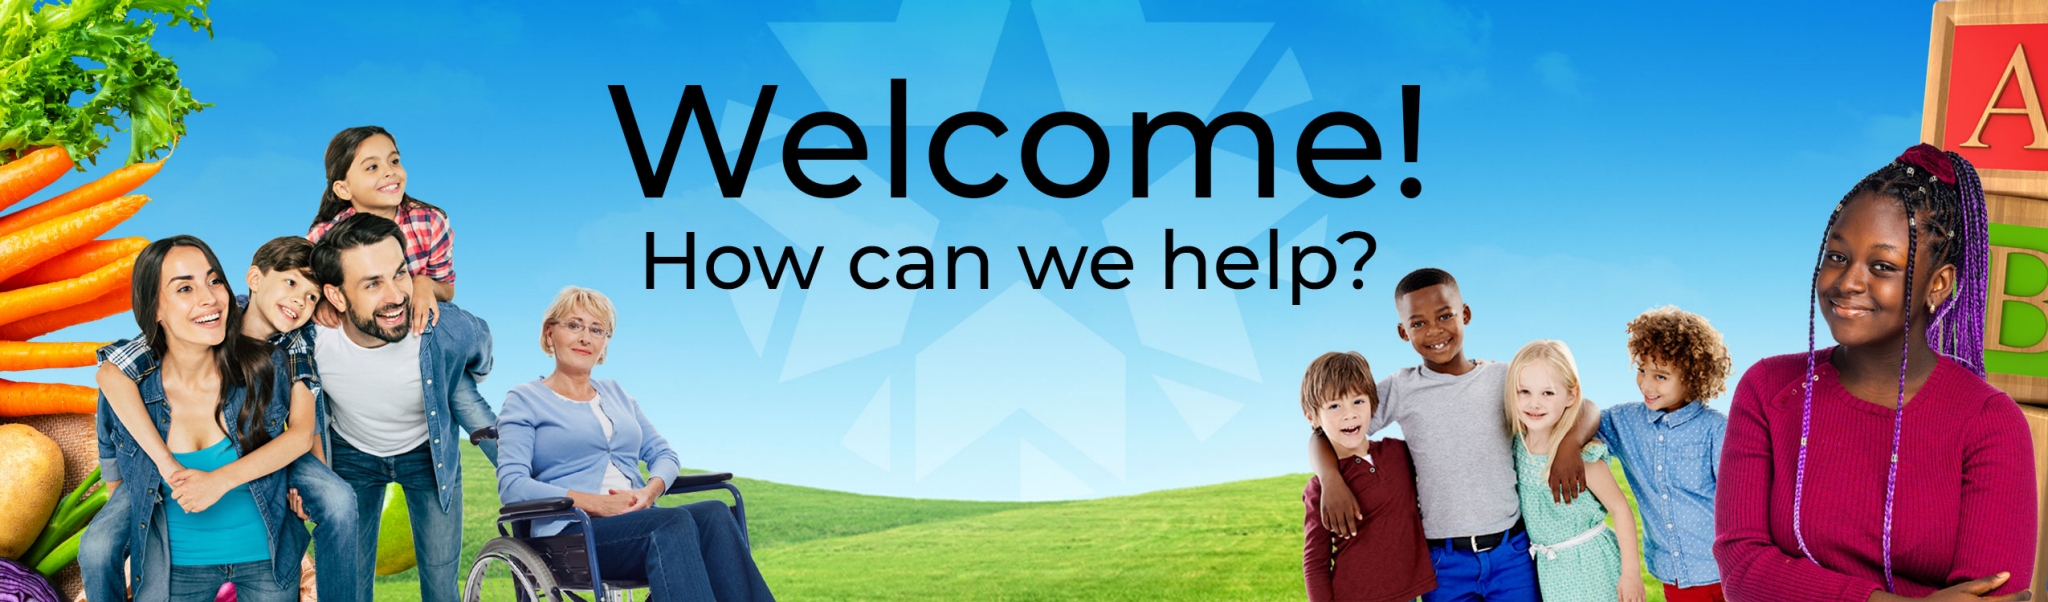 Welcome Home - Family Assistance Program